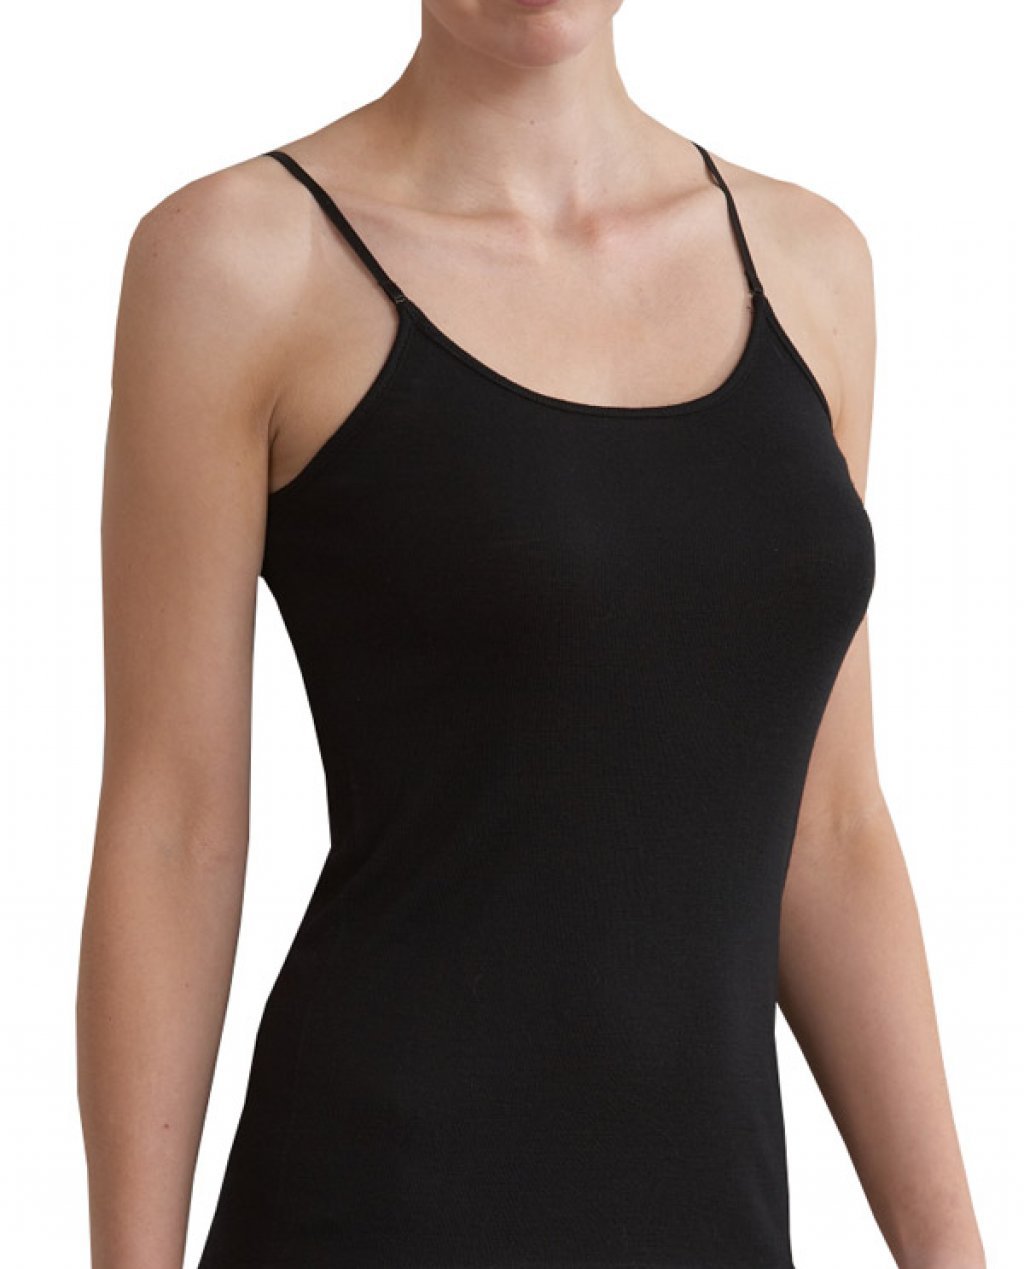 BaseLayers Thermal Underwear - Pure Merino Wool Camisole B4410 - Singlets & Tanks Black / 10 / S  Available at Illusions Lingerie